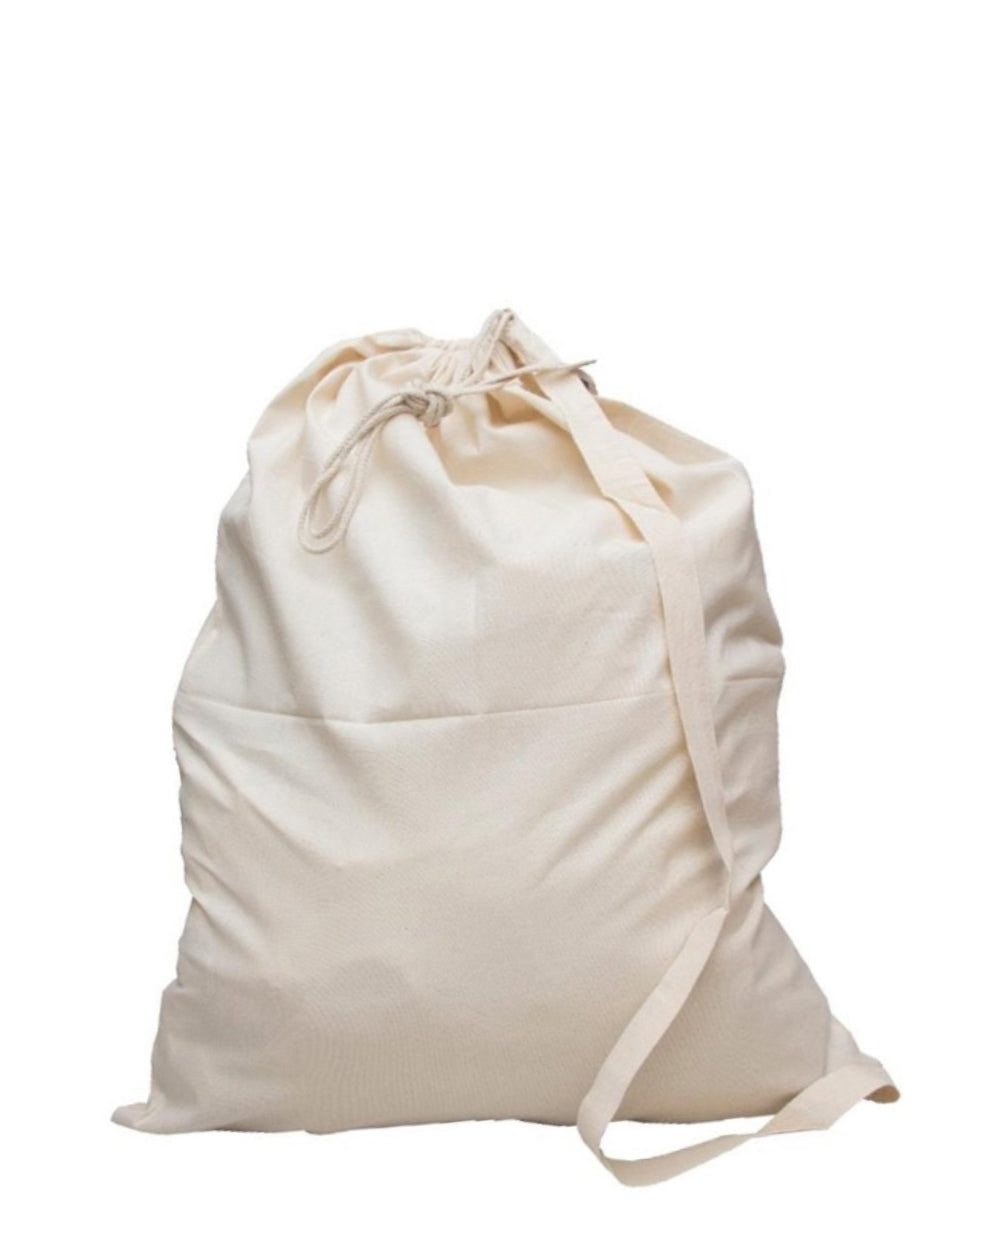 small-size-cotton-natural-laundry-bag